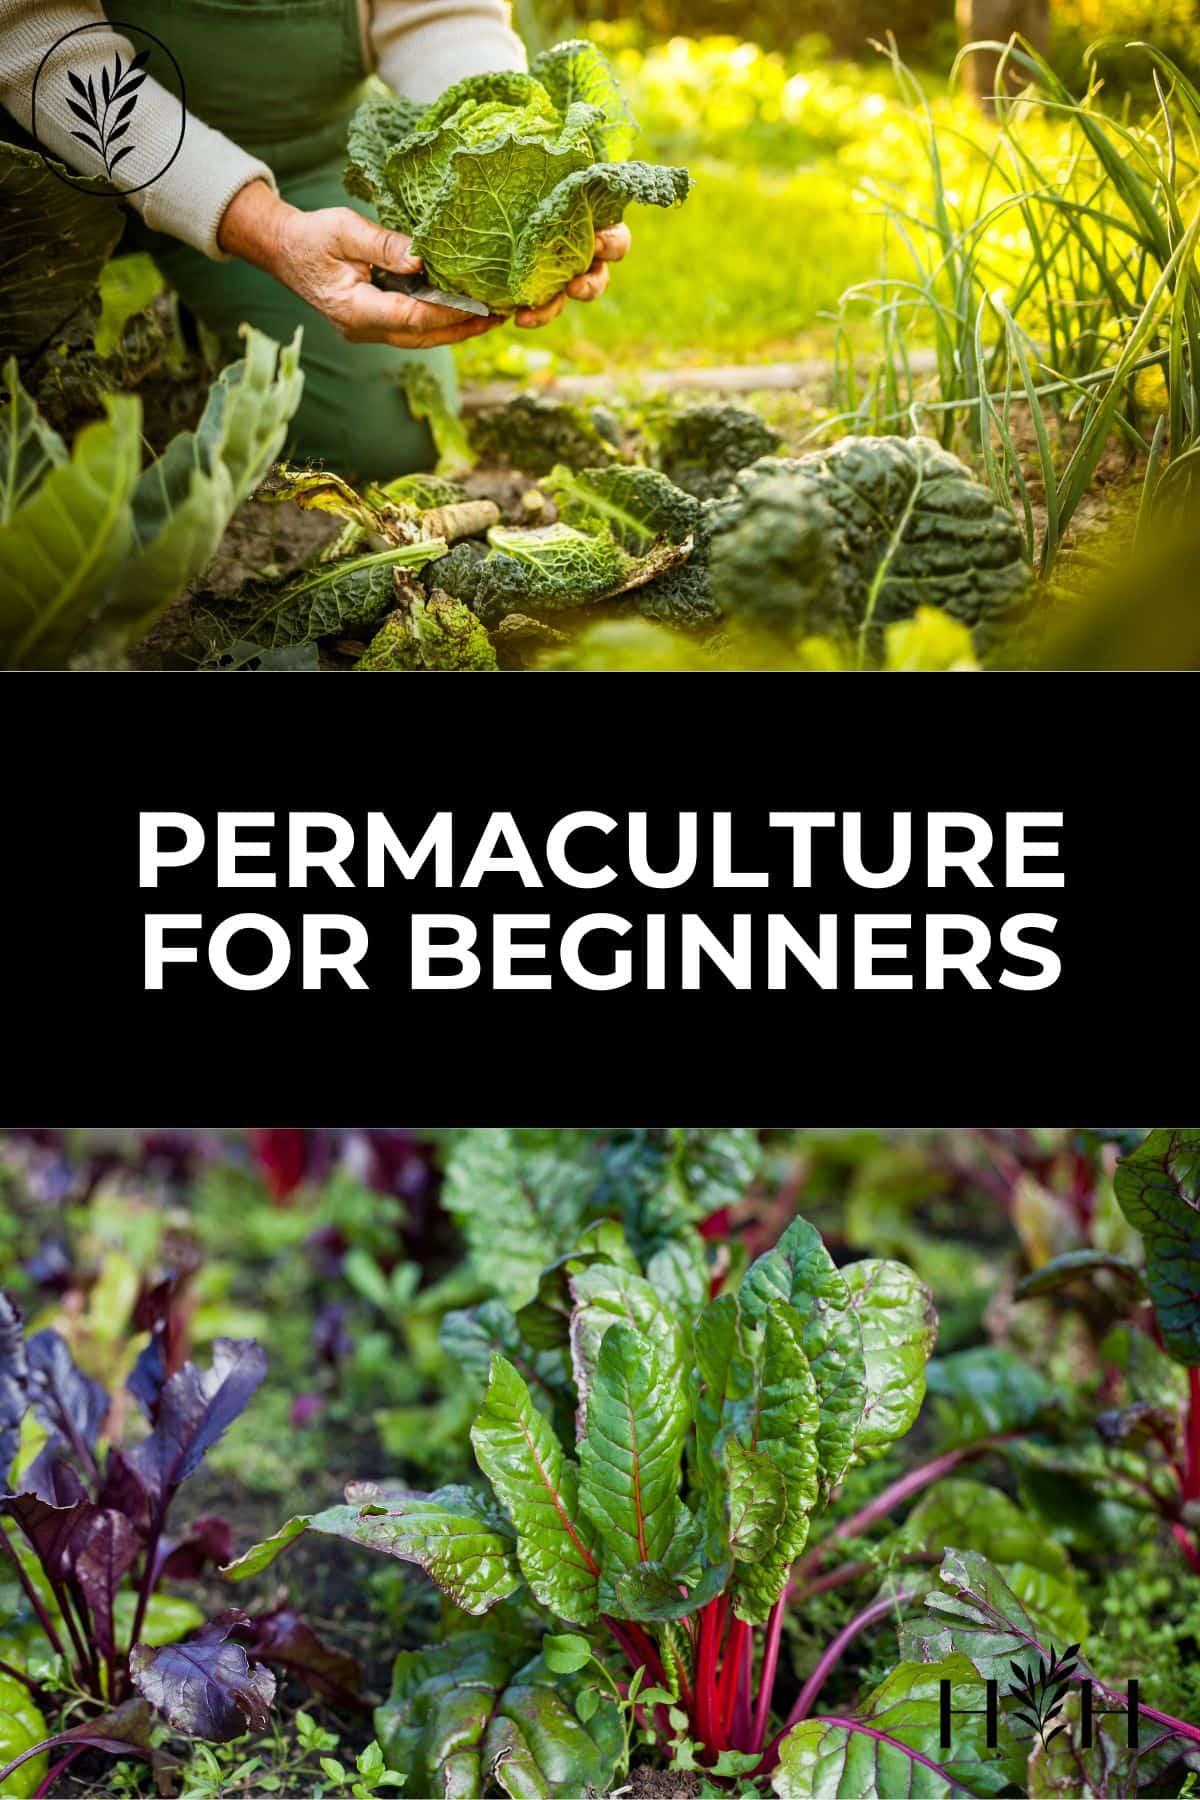 Permaculture for beginners via @home4theharvest